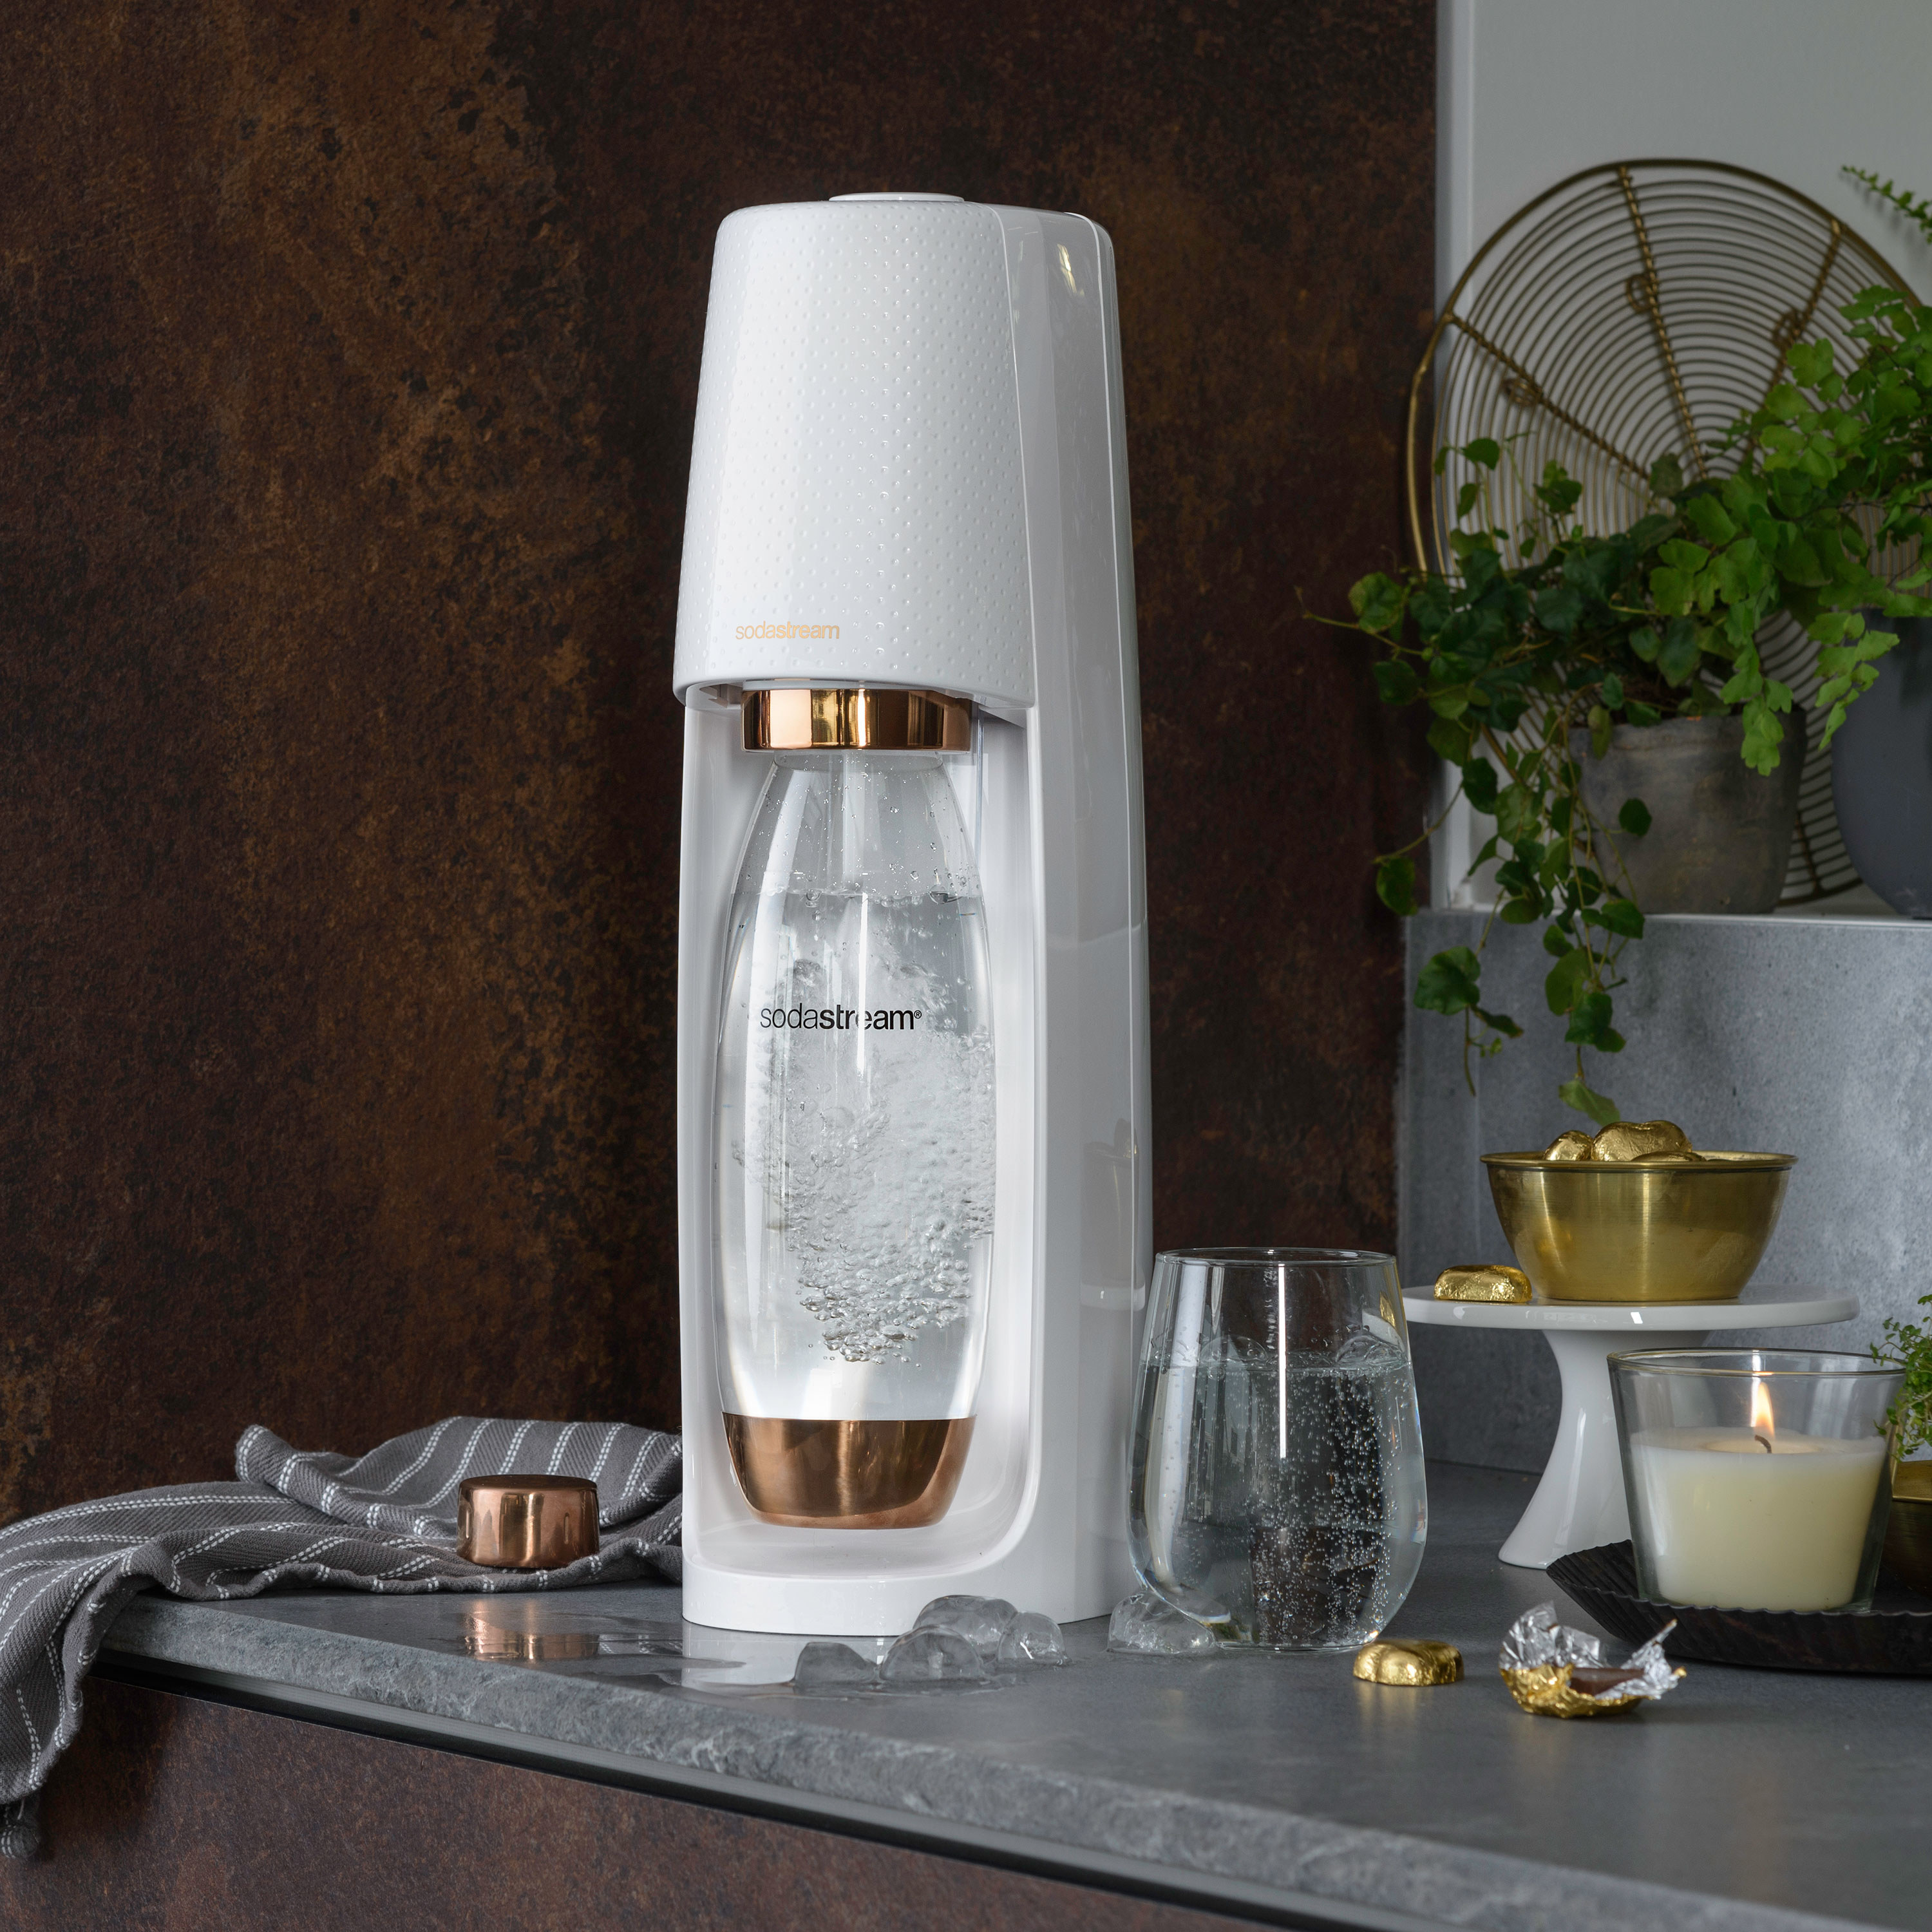 white and gold sodastream maker creating fizzy water in a bottle